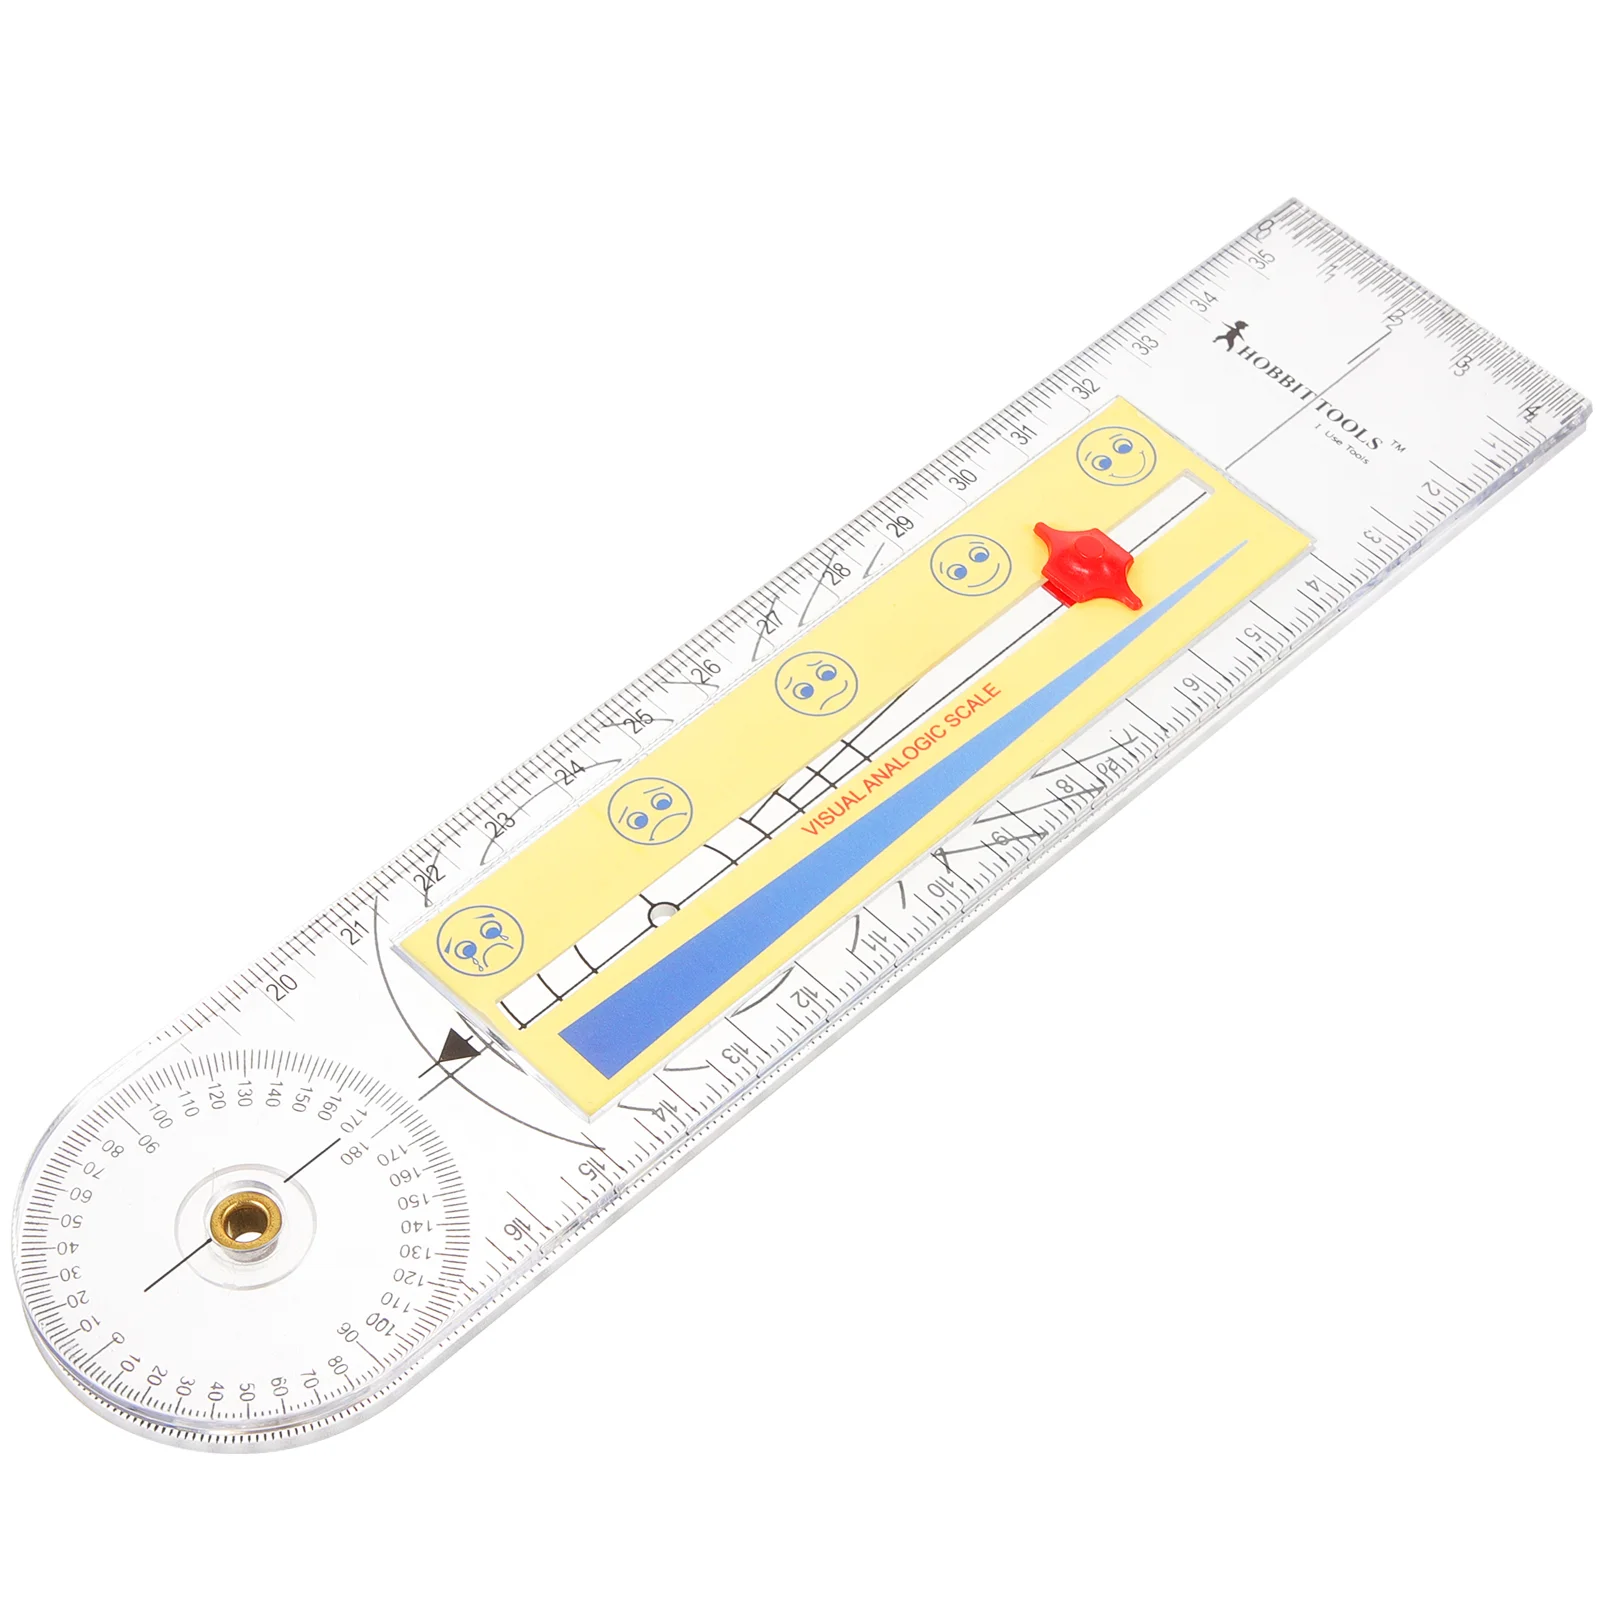 Angle Finder Tool Finger Goniometer Measuring Rotary Medical Abs Ruler Hospital Folding aluminium alloy angle ruler finder measuring ruler 6 fold perforated mold template tool locator drill guide tile hole glass tile